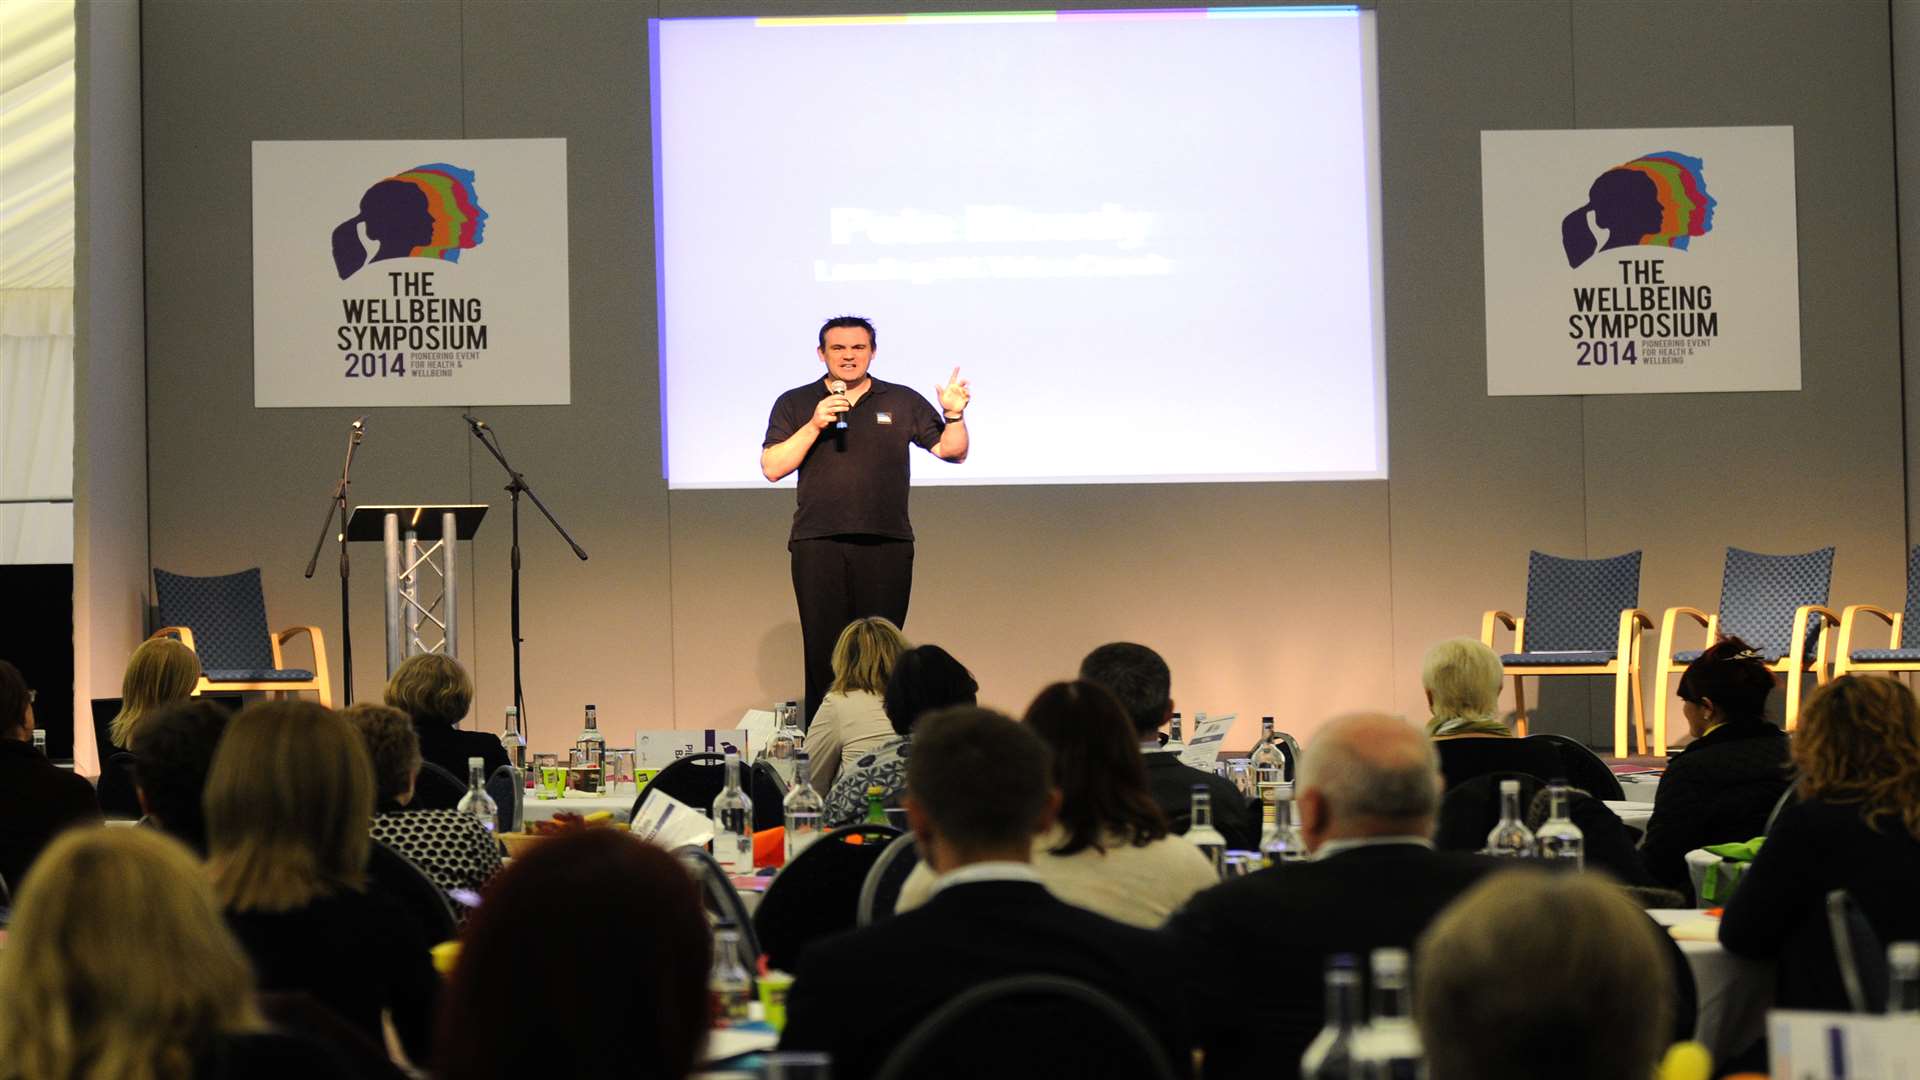 The Wellbeing Symposium took place at the Kent Event Centre at the Kent Showground, Detling